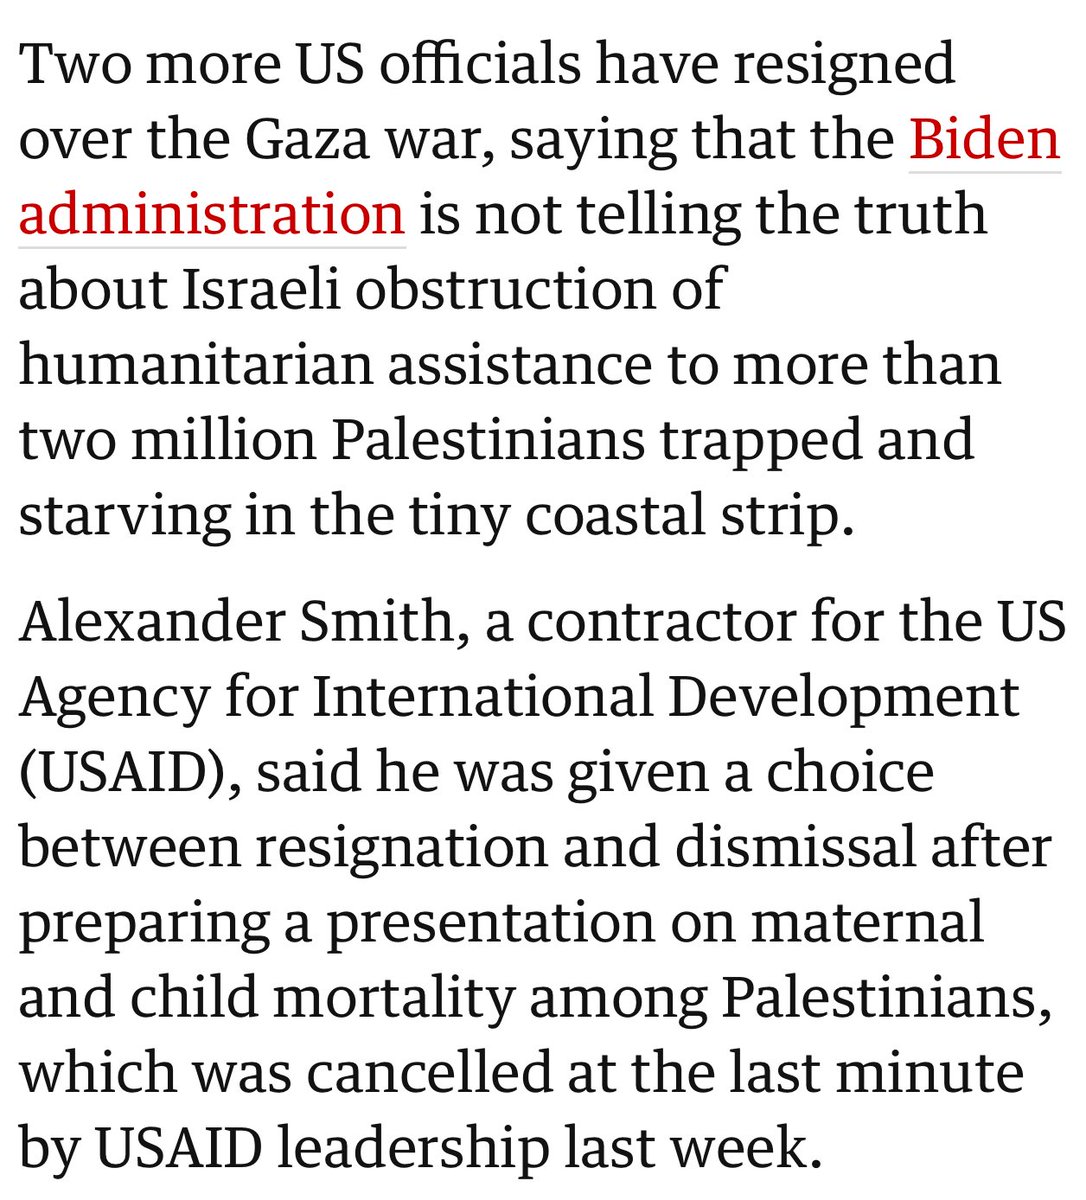 Two more US officials resign over Biden administration’s position on Gaza. The officials accuse the administration of not telling the truth about Israel’s obstruction of aid to Palestinians in Gaza theguardian.com/us-news/articl…